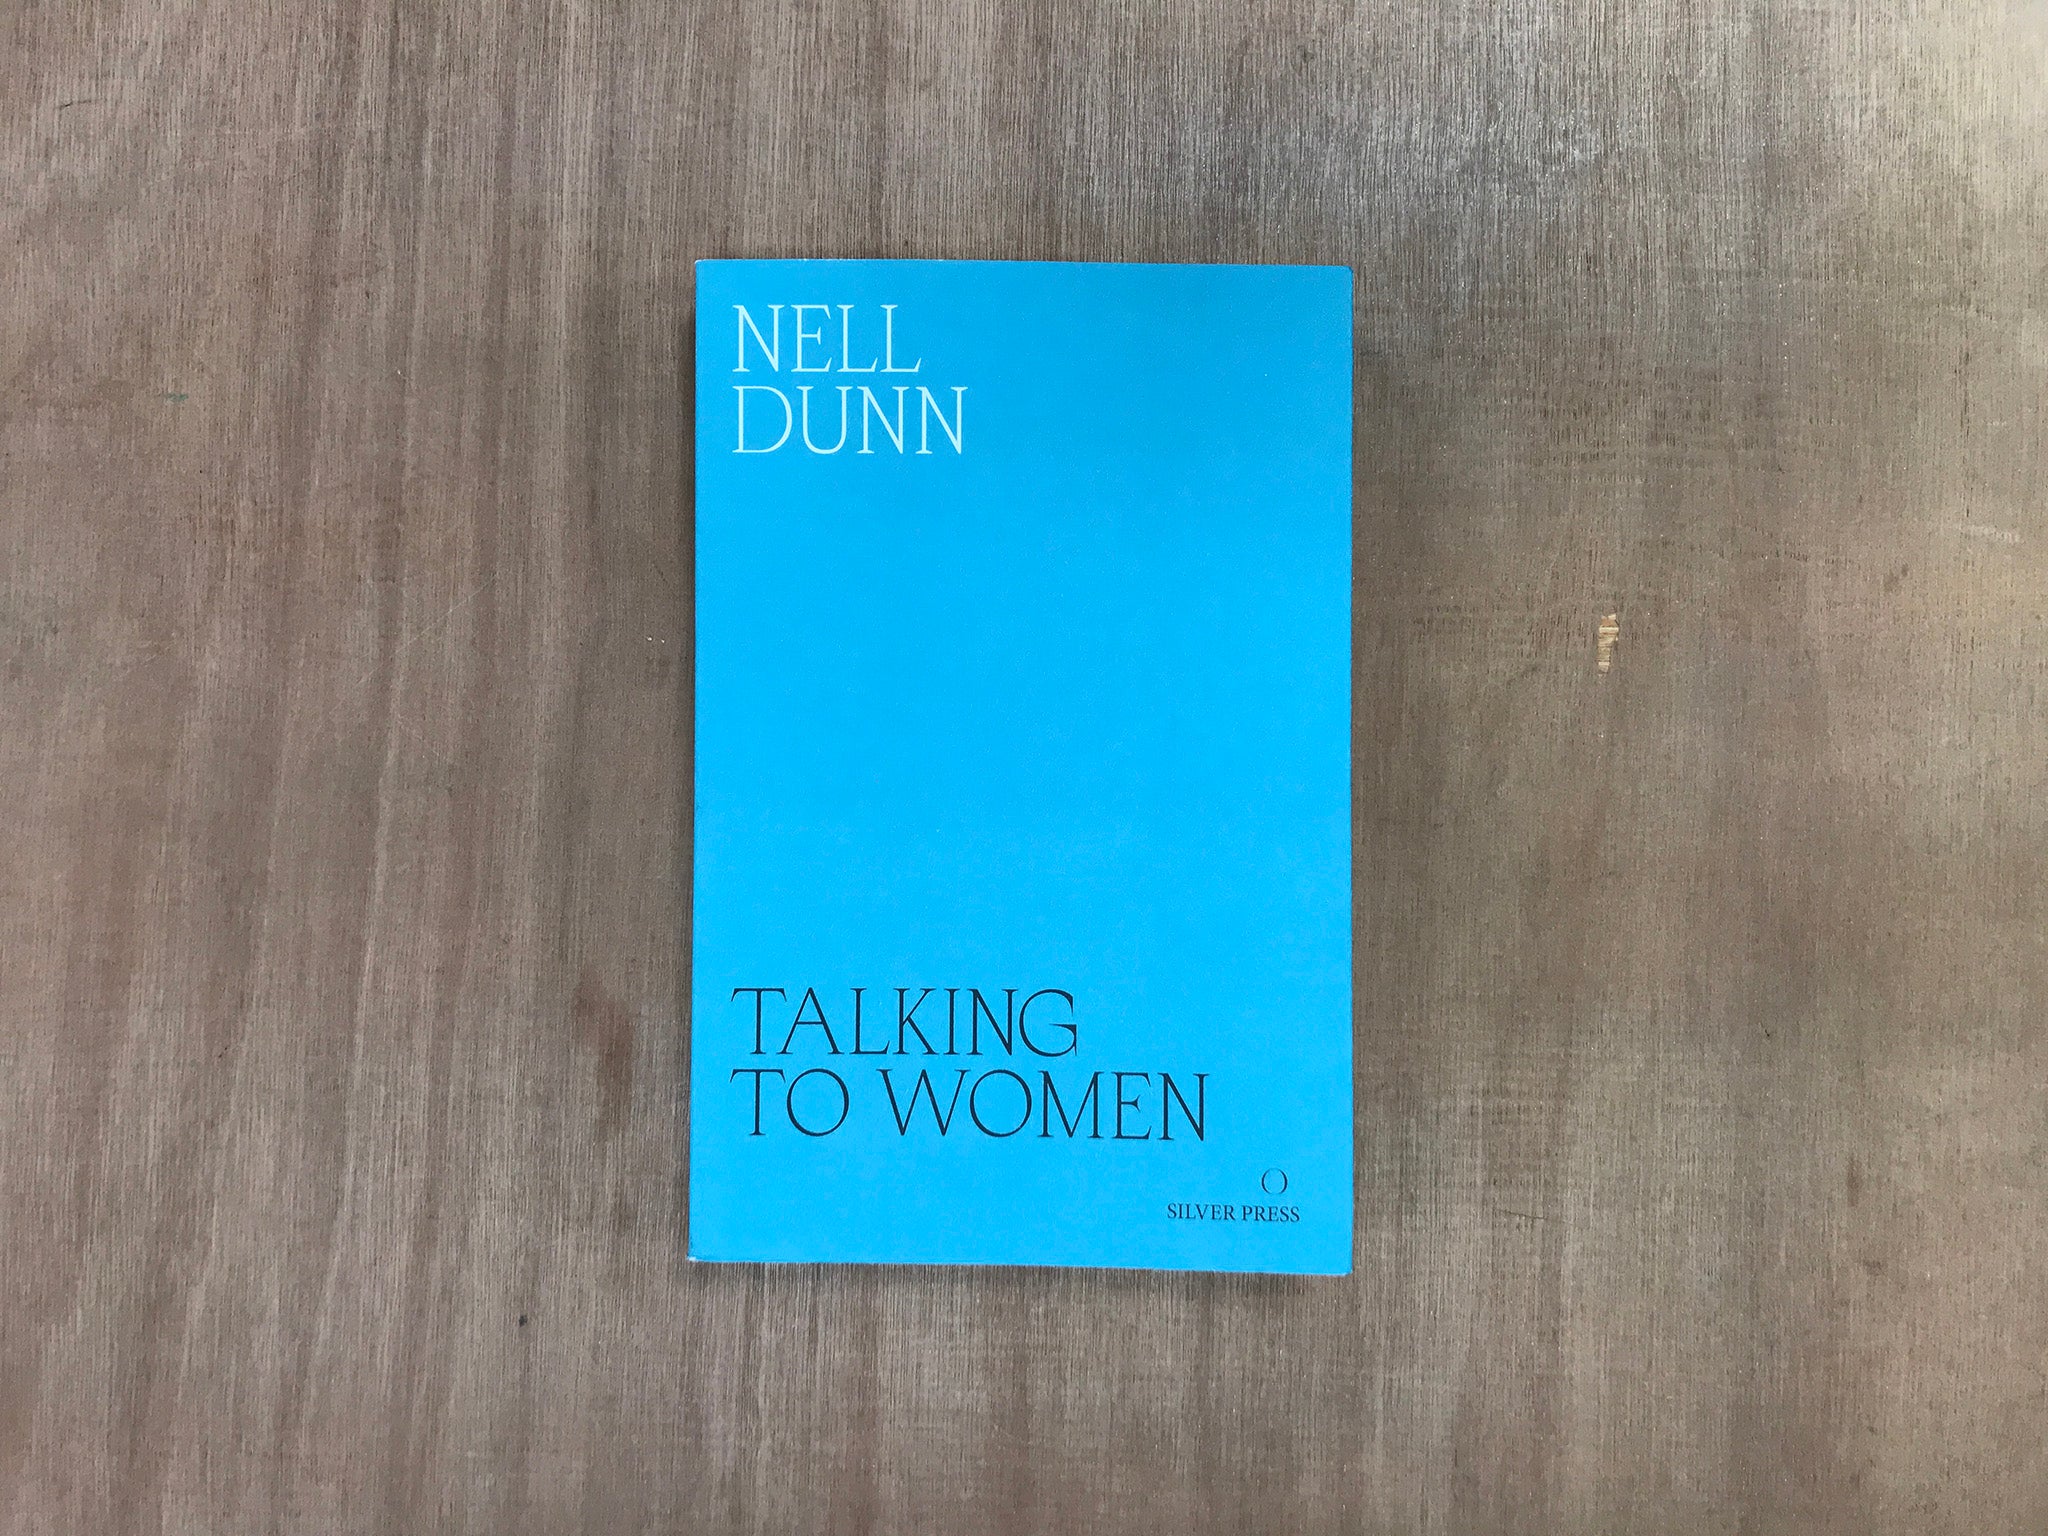 TALKING TO WOMEN by Nell Dunn